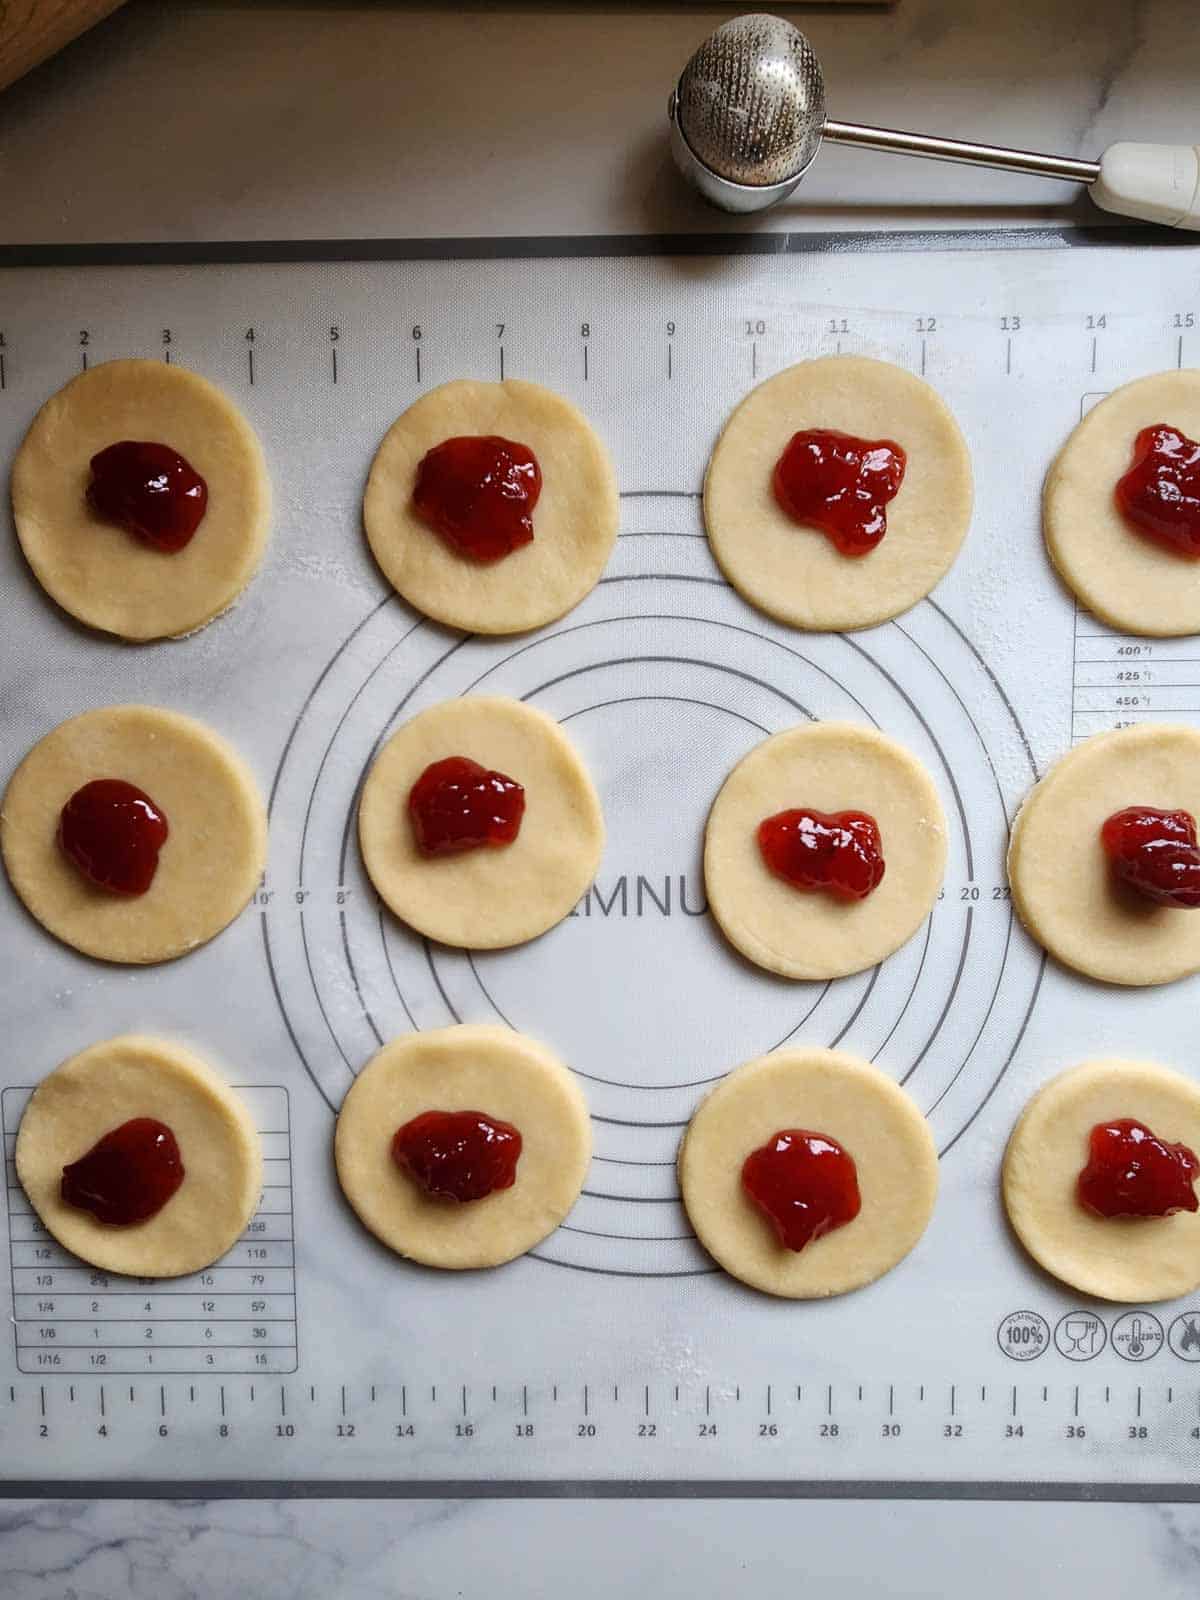 Pie dough cut in circles with strawberry jam placed in the middle.